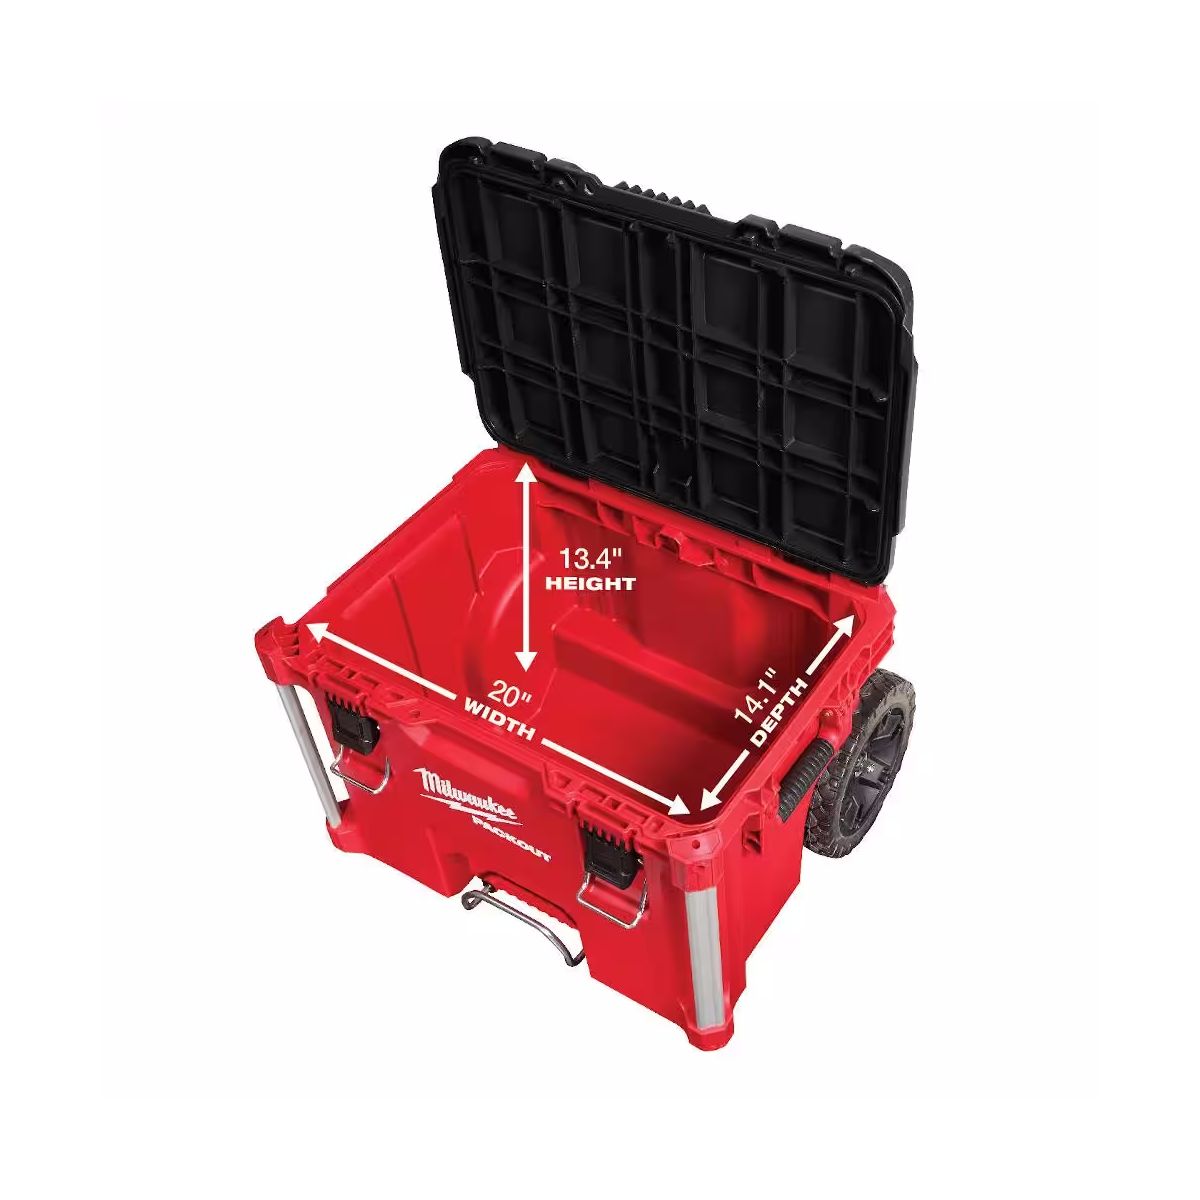 48-22-8426 - PACKOUT 22" Rolling Tool Box